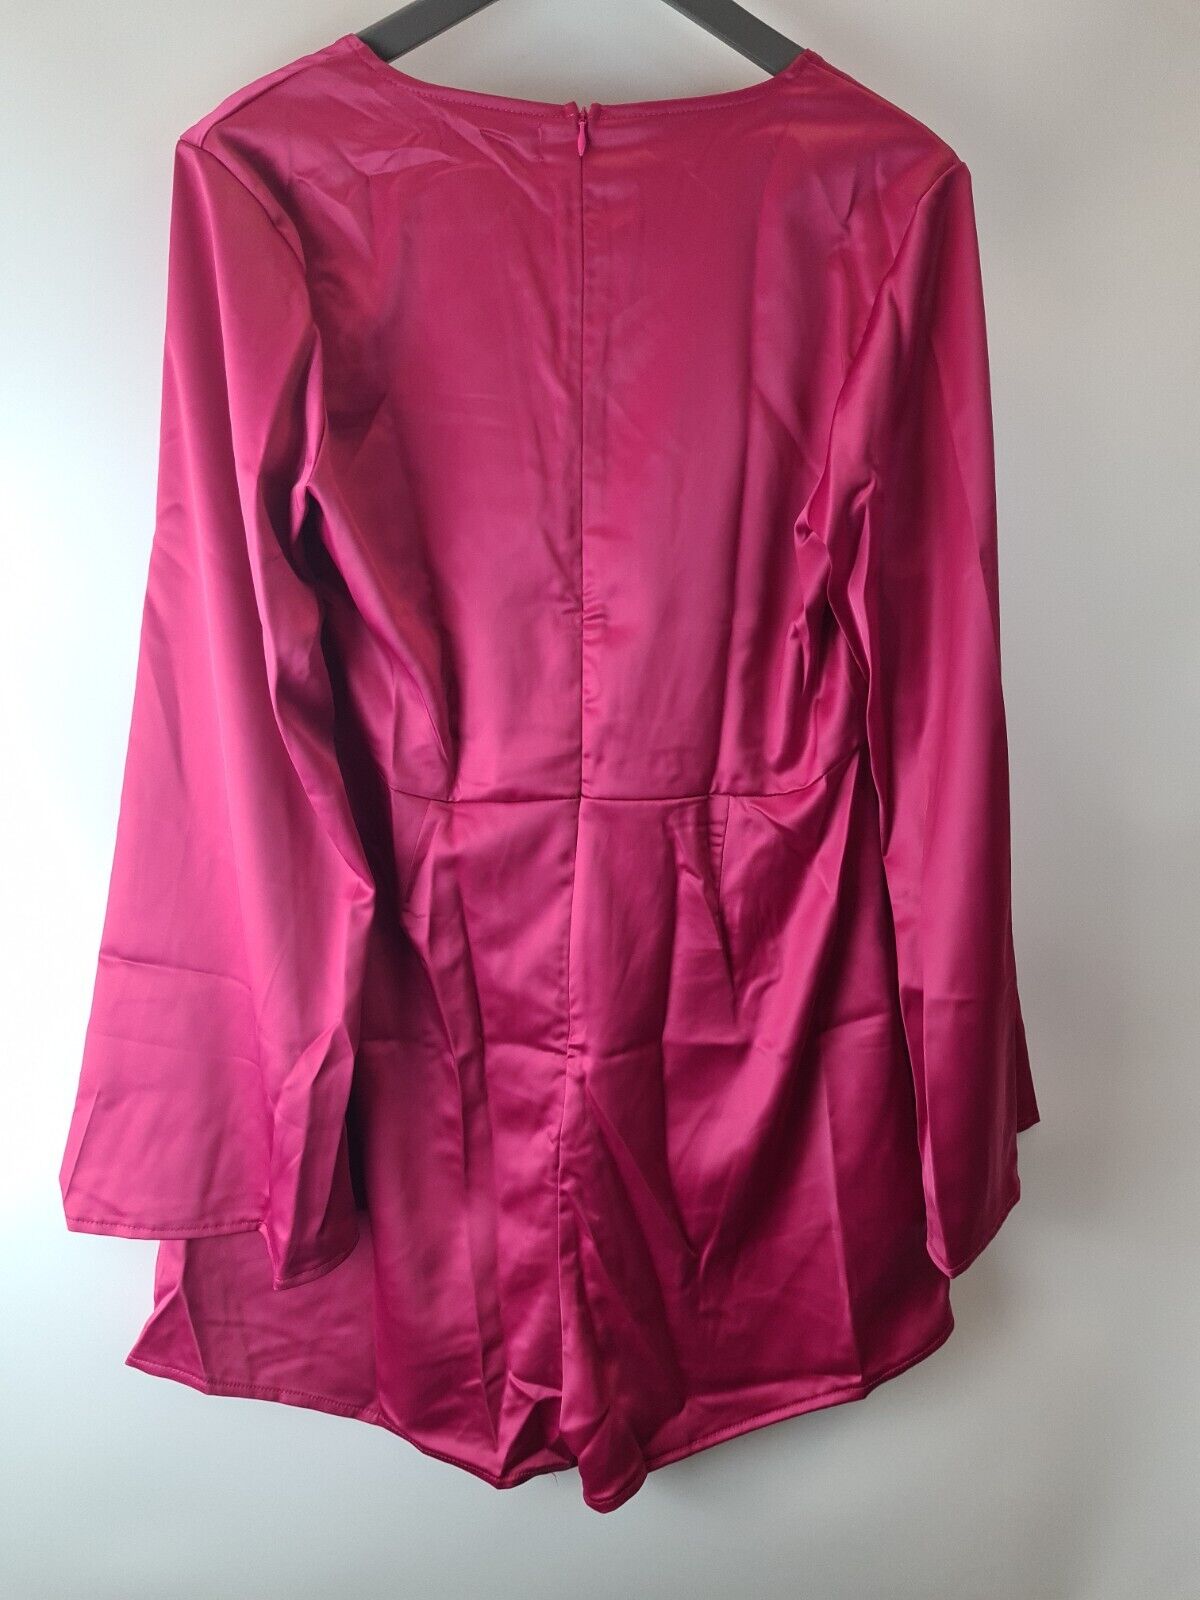 Missguided Satin Tie Front Flare Sleeves Hot Pink Playsuit Size 14 **** V83